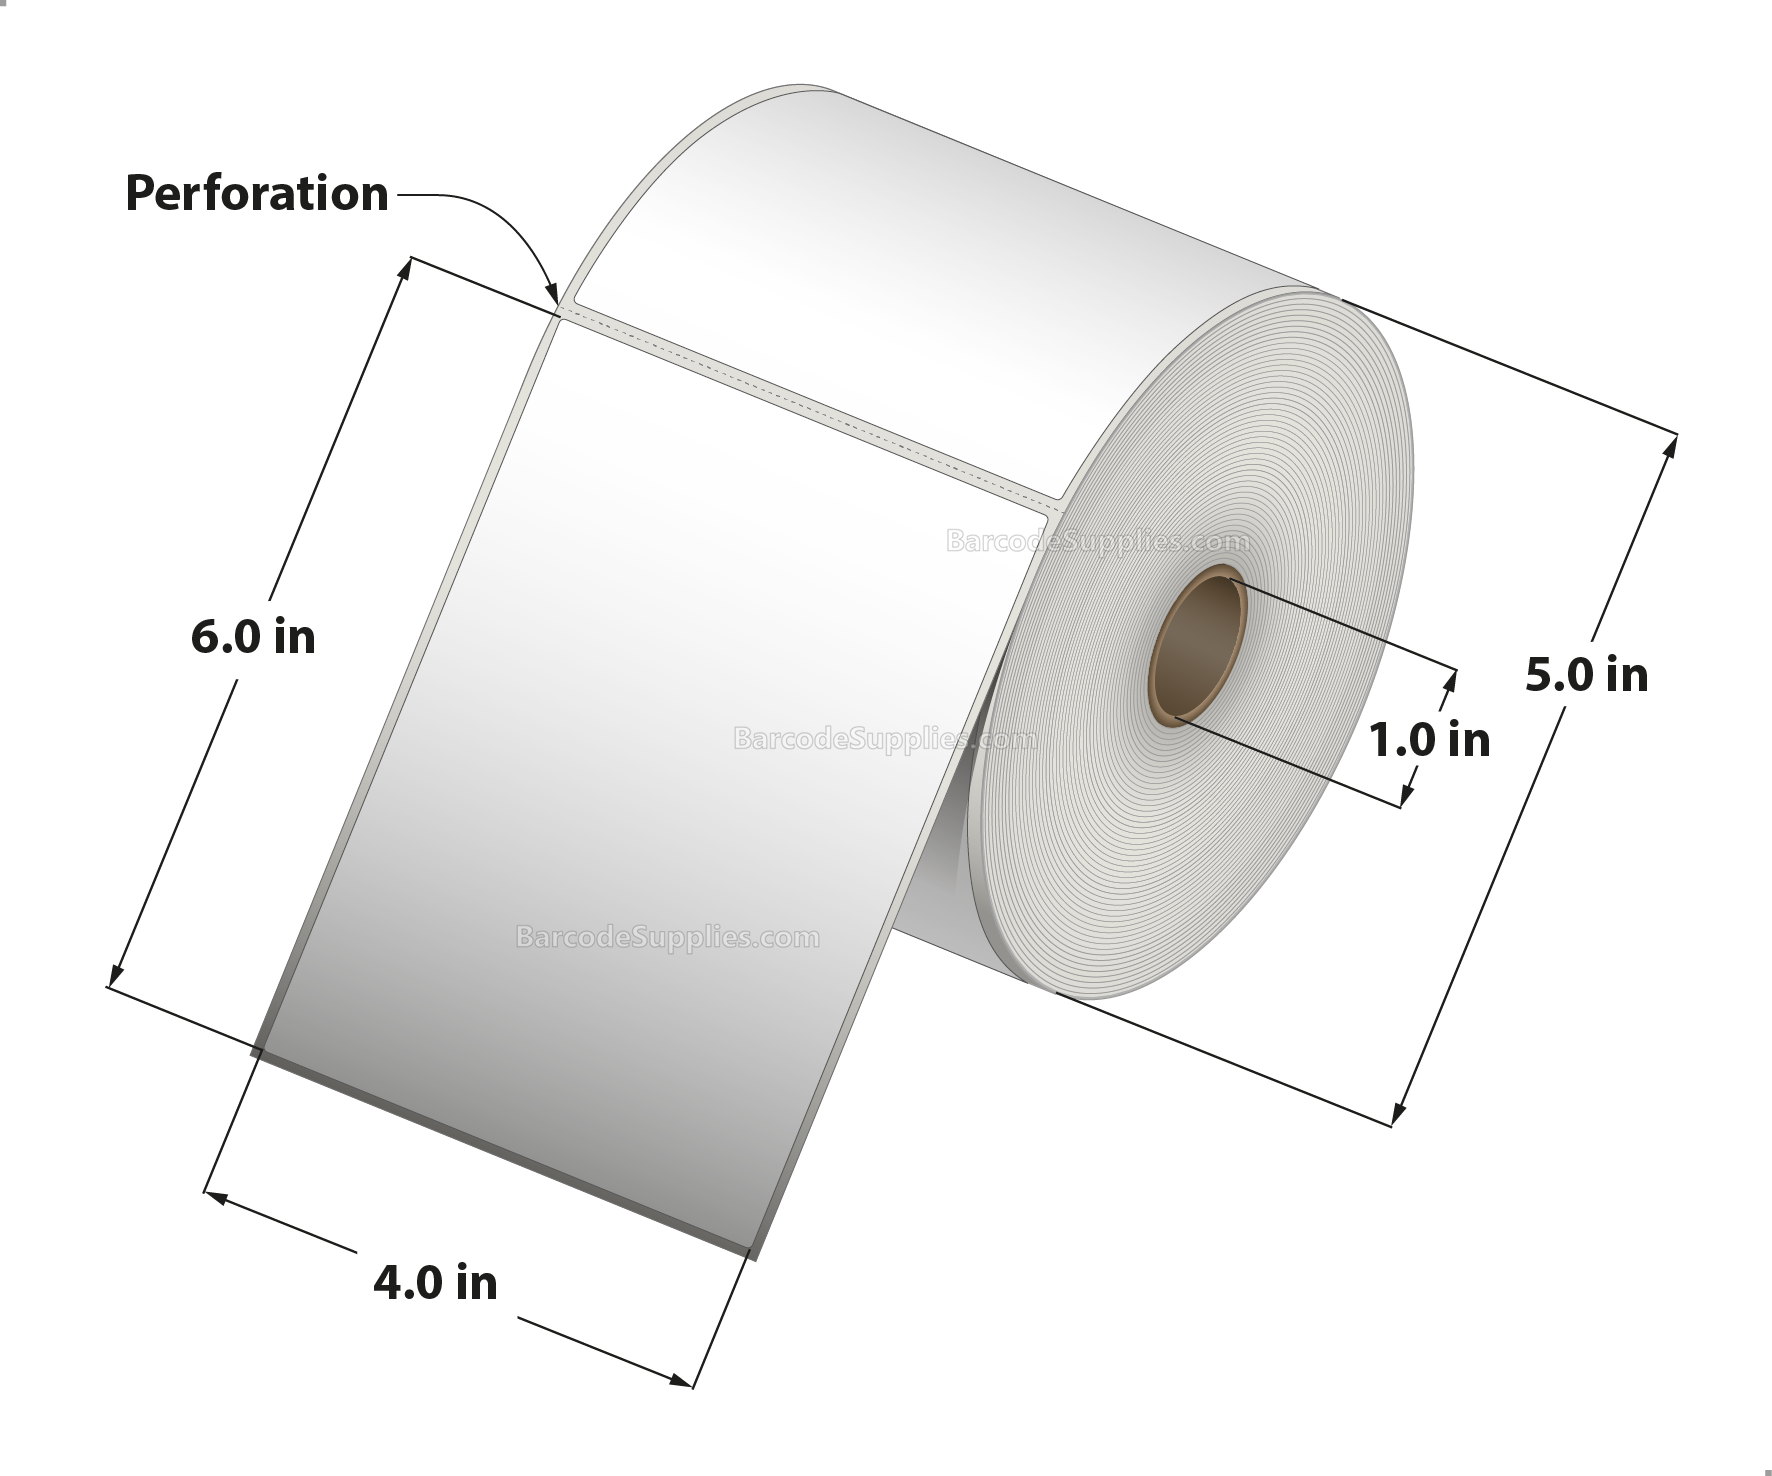 4 x 6 Thermal Transfer White Labels With Rubber Adhesive - Perforated - 475 Labels Per Roll - Carton Of 12 Rolls - 5700 Labels Total - MPN: RTT5-400600-1P